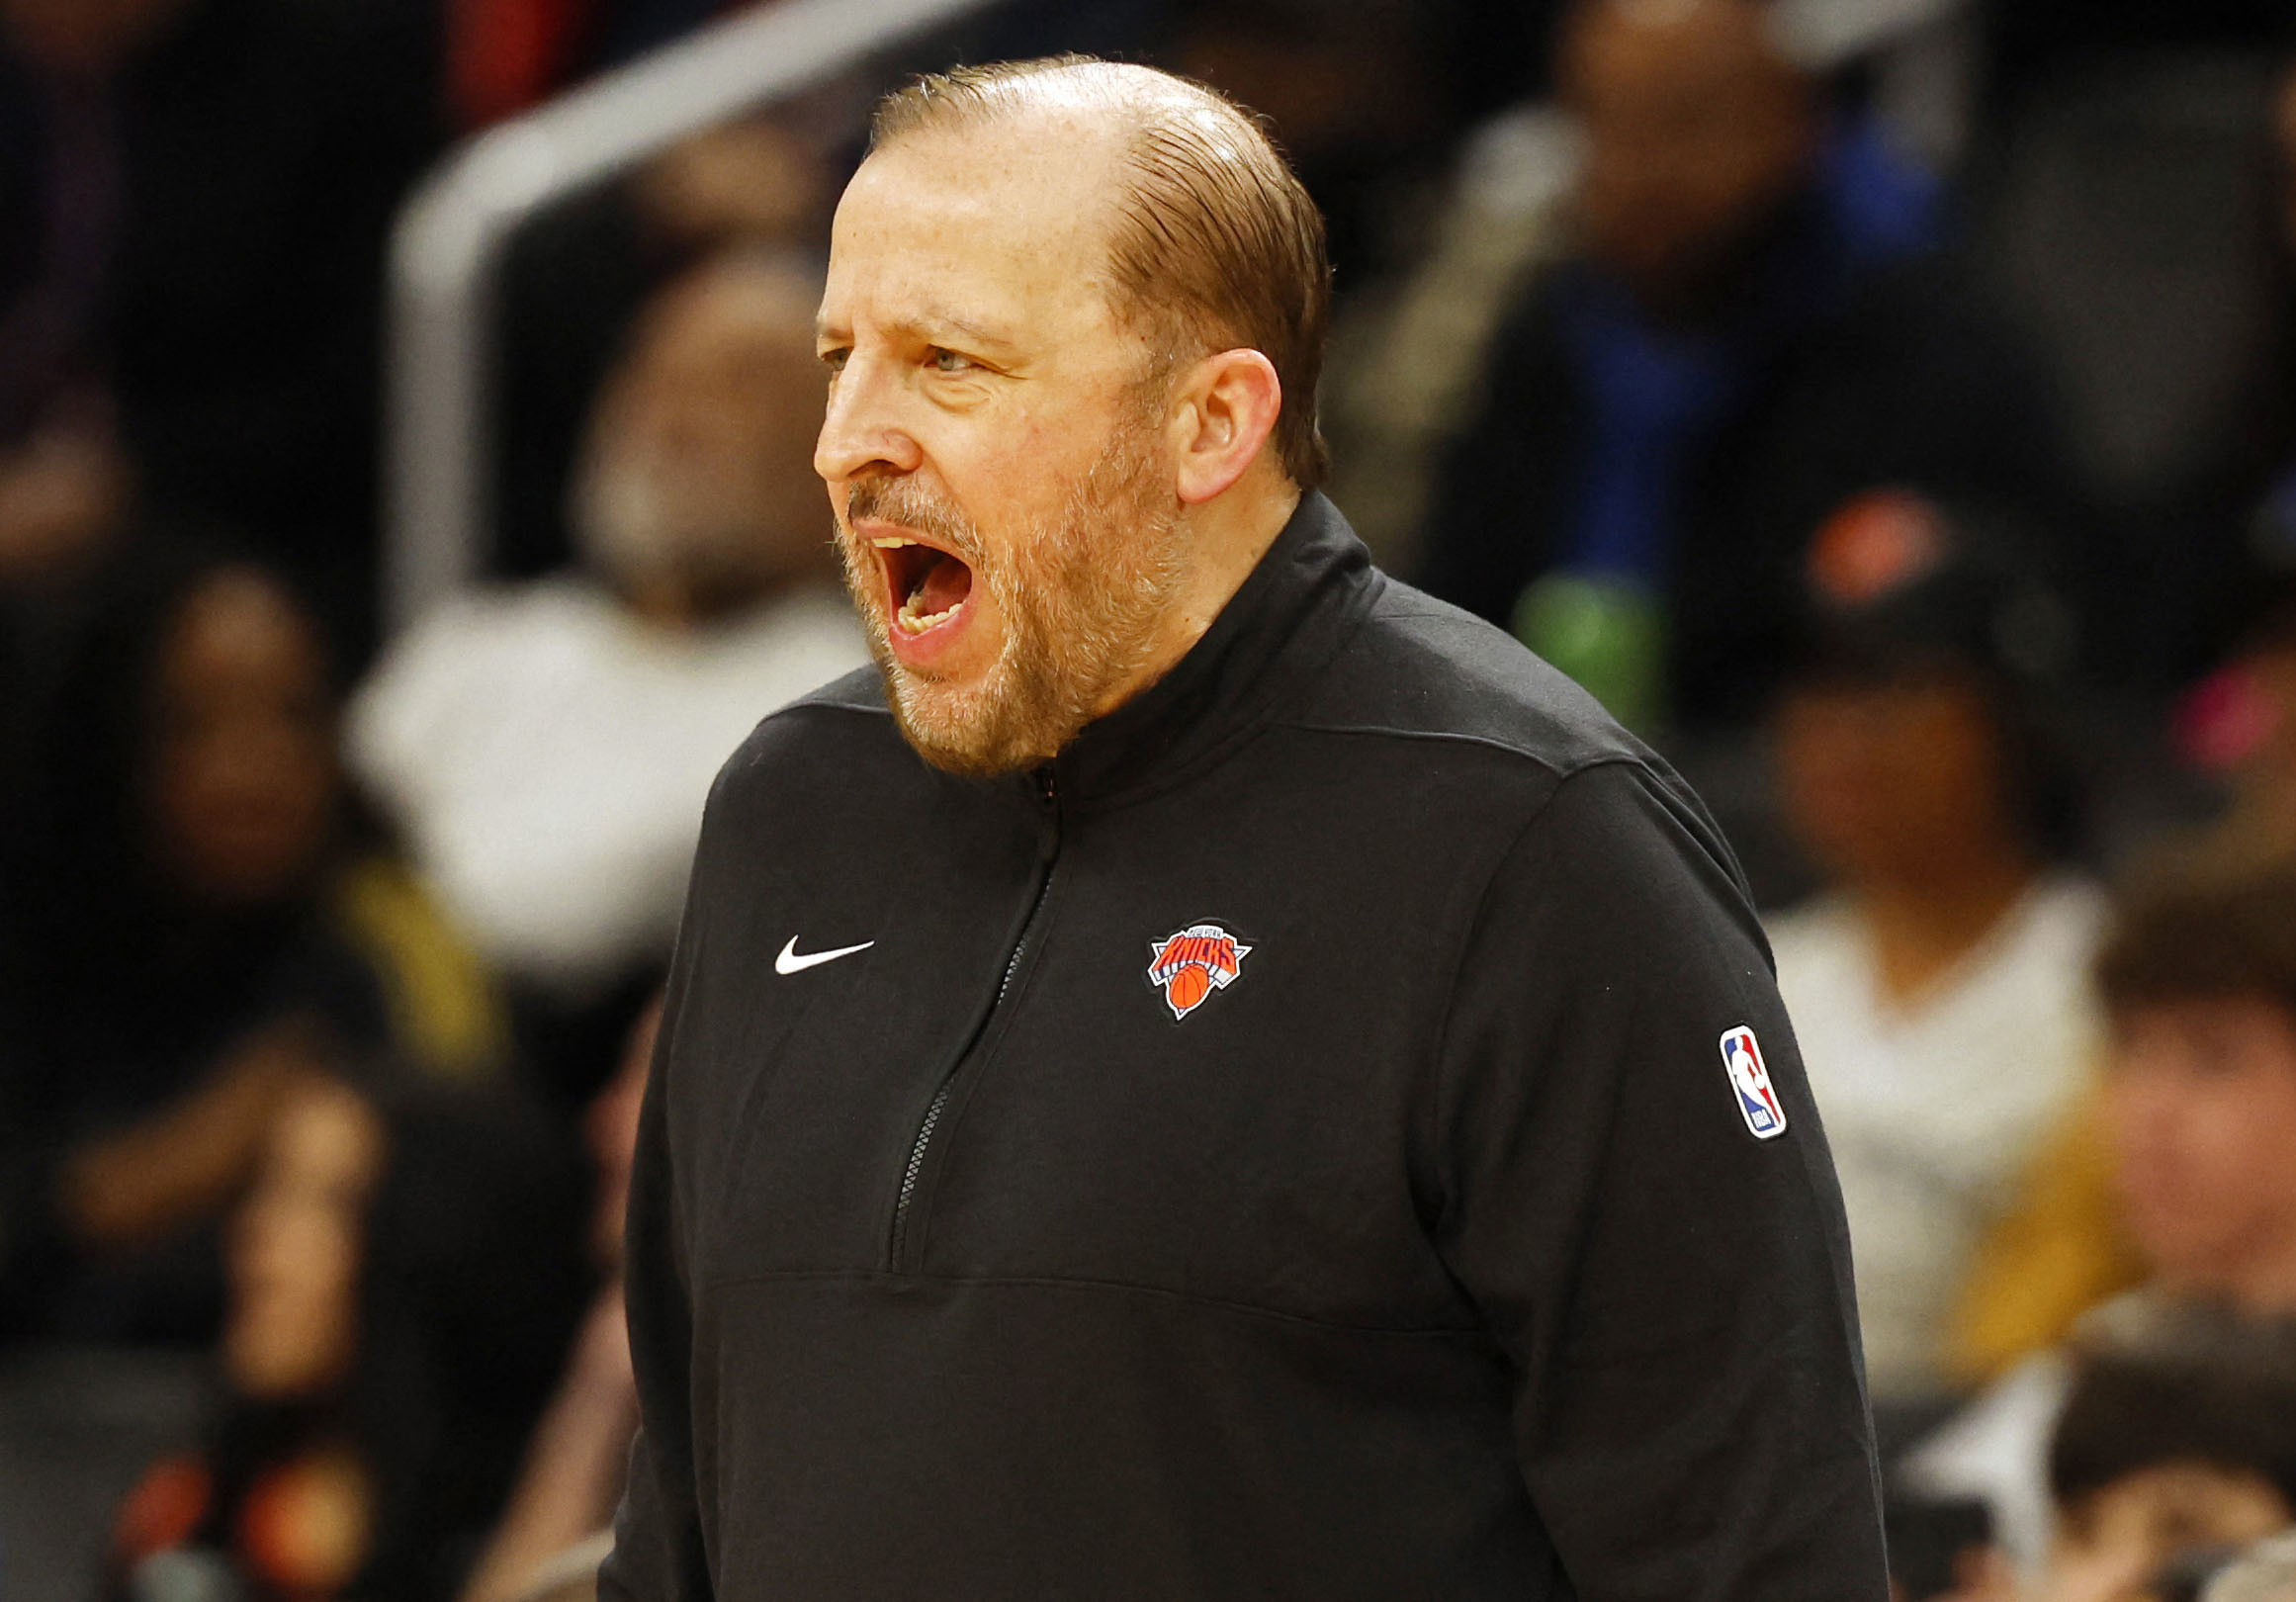 Tom Thibodeau’s tirade wakes up Knicks in win: ‘You don’t want to know